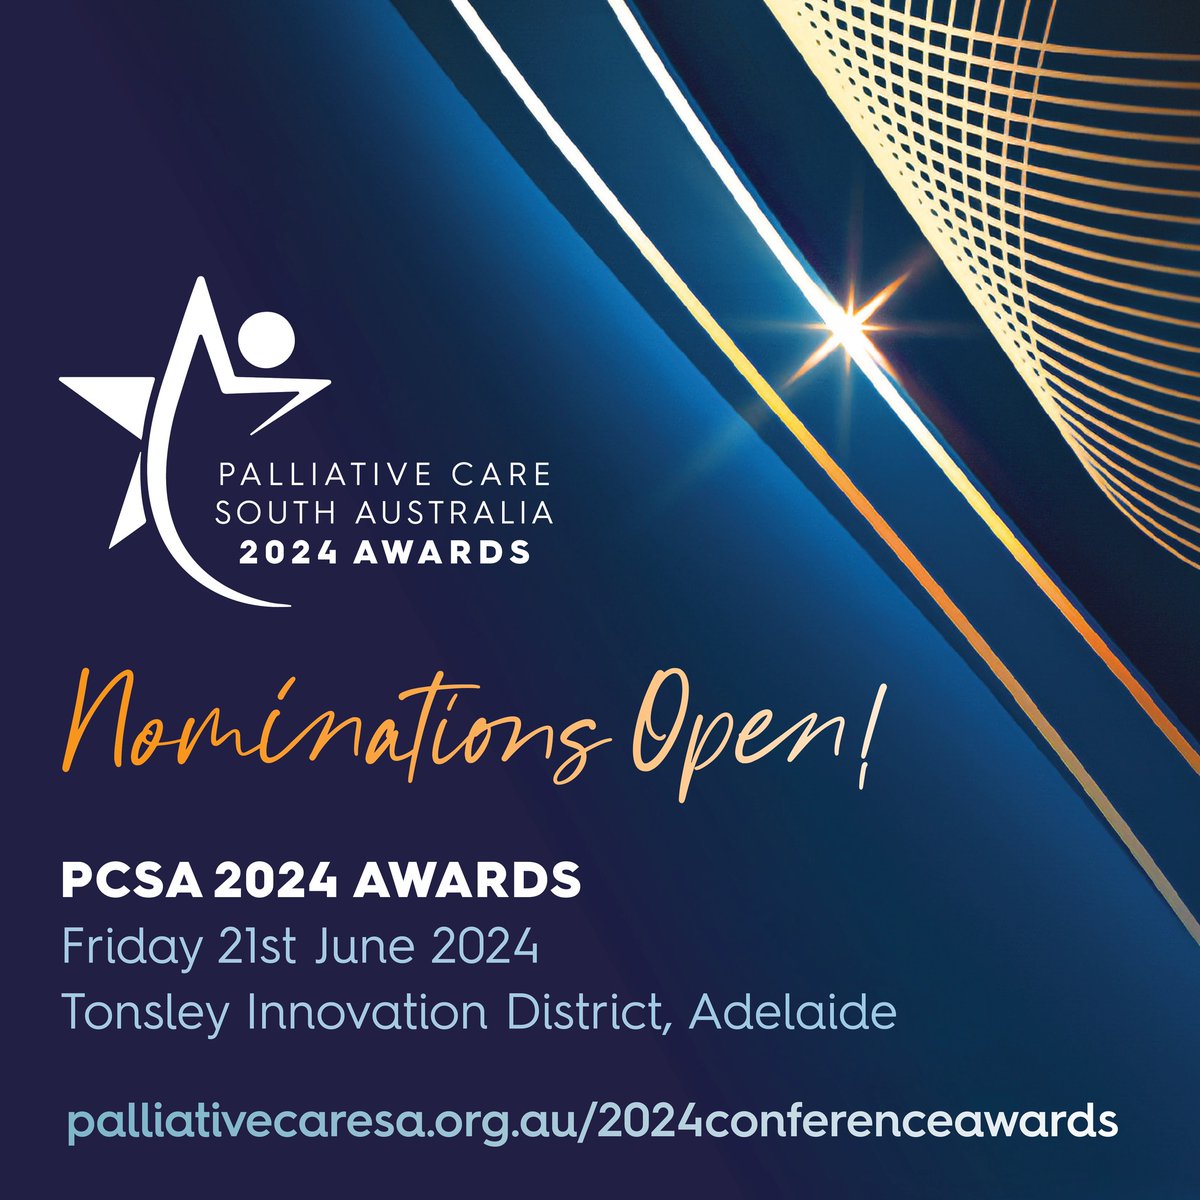 Nominations for the Palliative Care South Australia Awards close on Wednesday, 1 May! Nominate this weekend ➡️ bit.ly/3P8Y9Zb